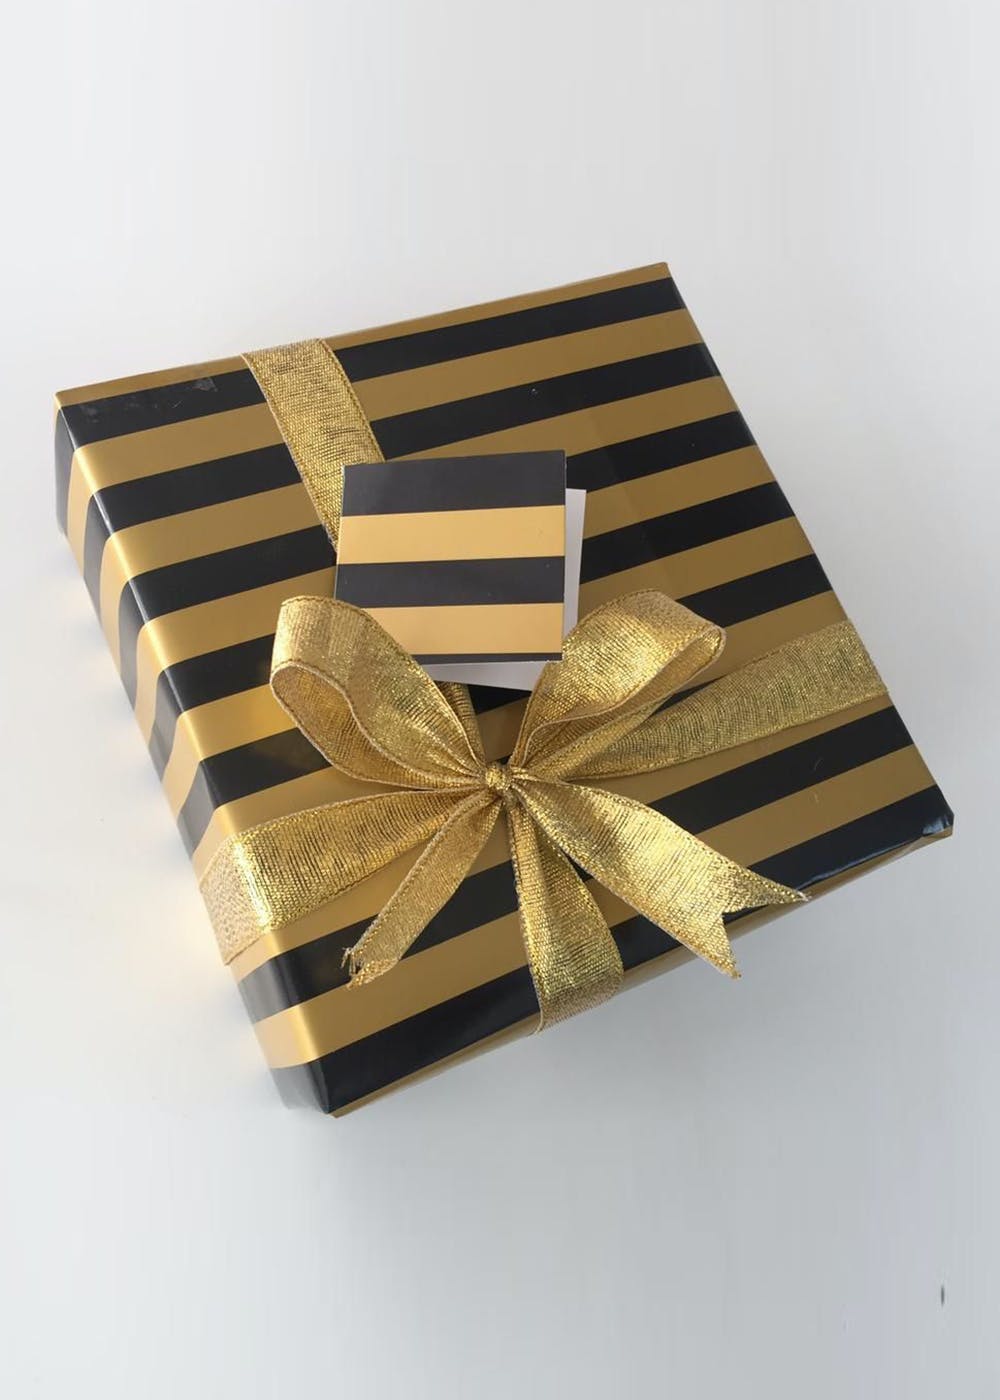 Mew-Veau Metallic Gold and Green Wrapping Paper | Deco Paws